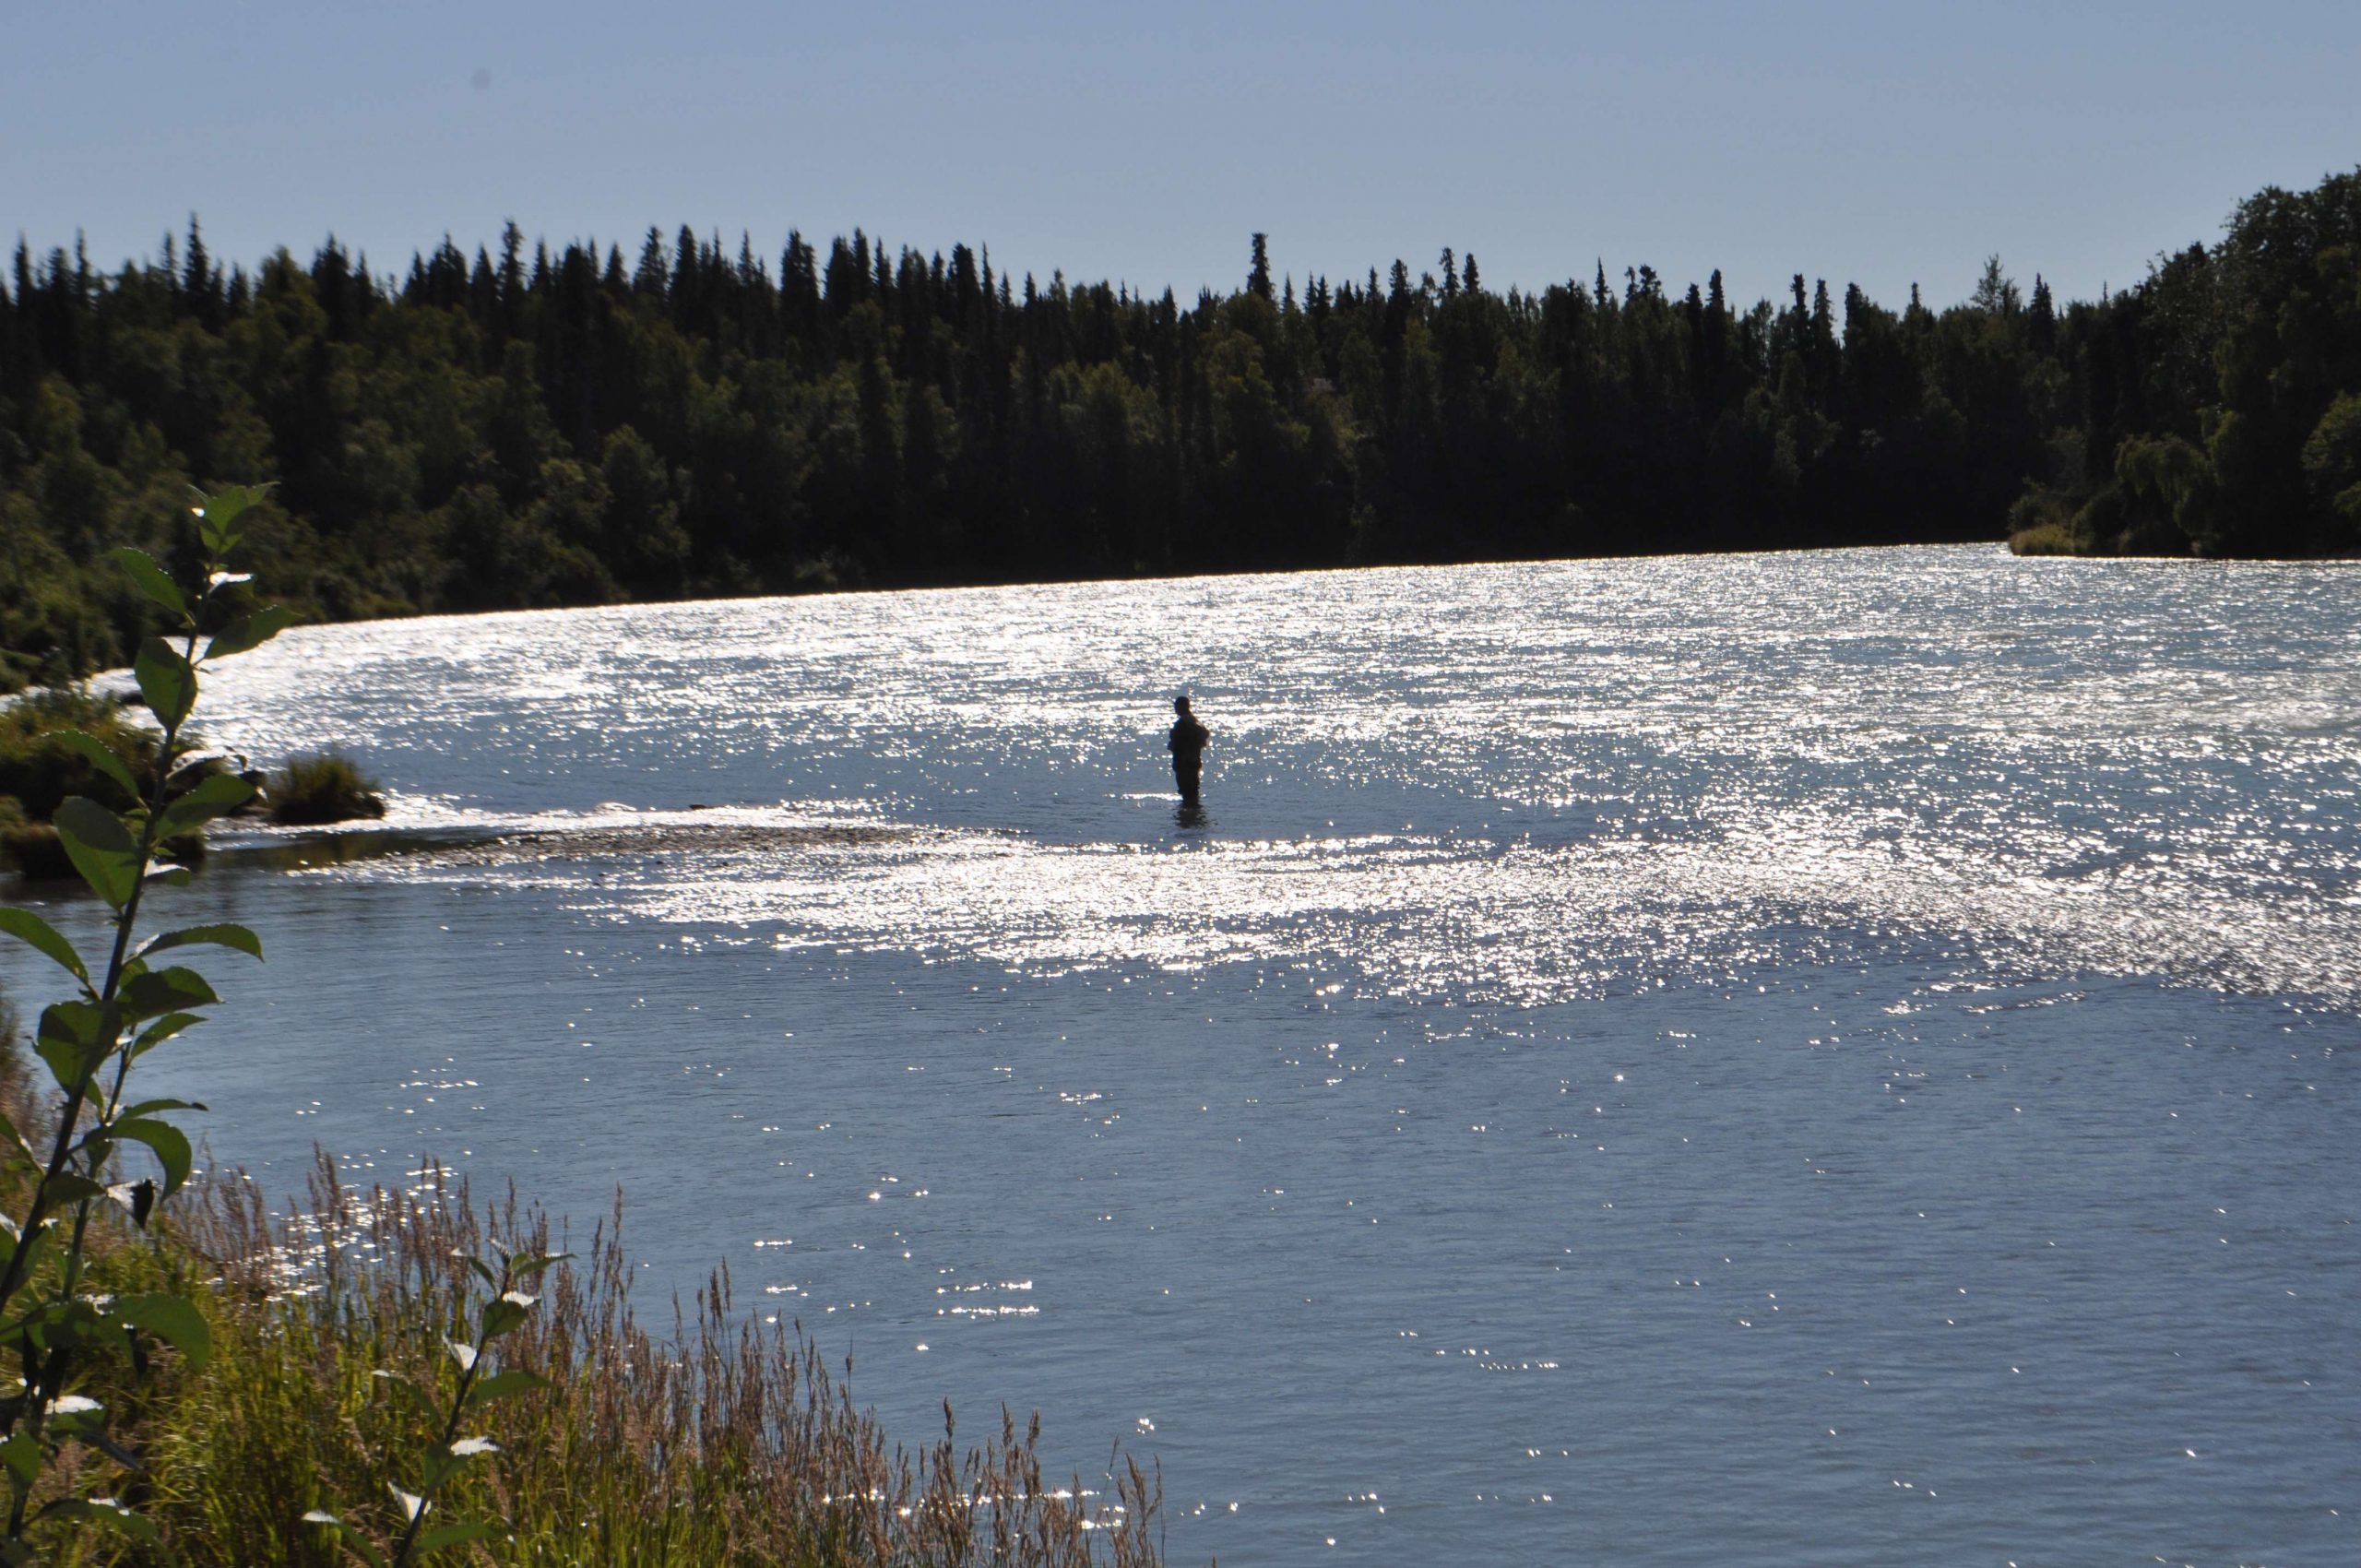 A salmon fisherman wades out into the Kenai River from an access point developed by the Kenai River Sportfishing Association.